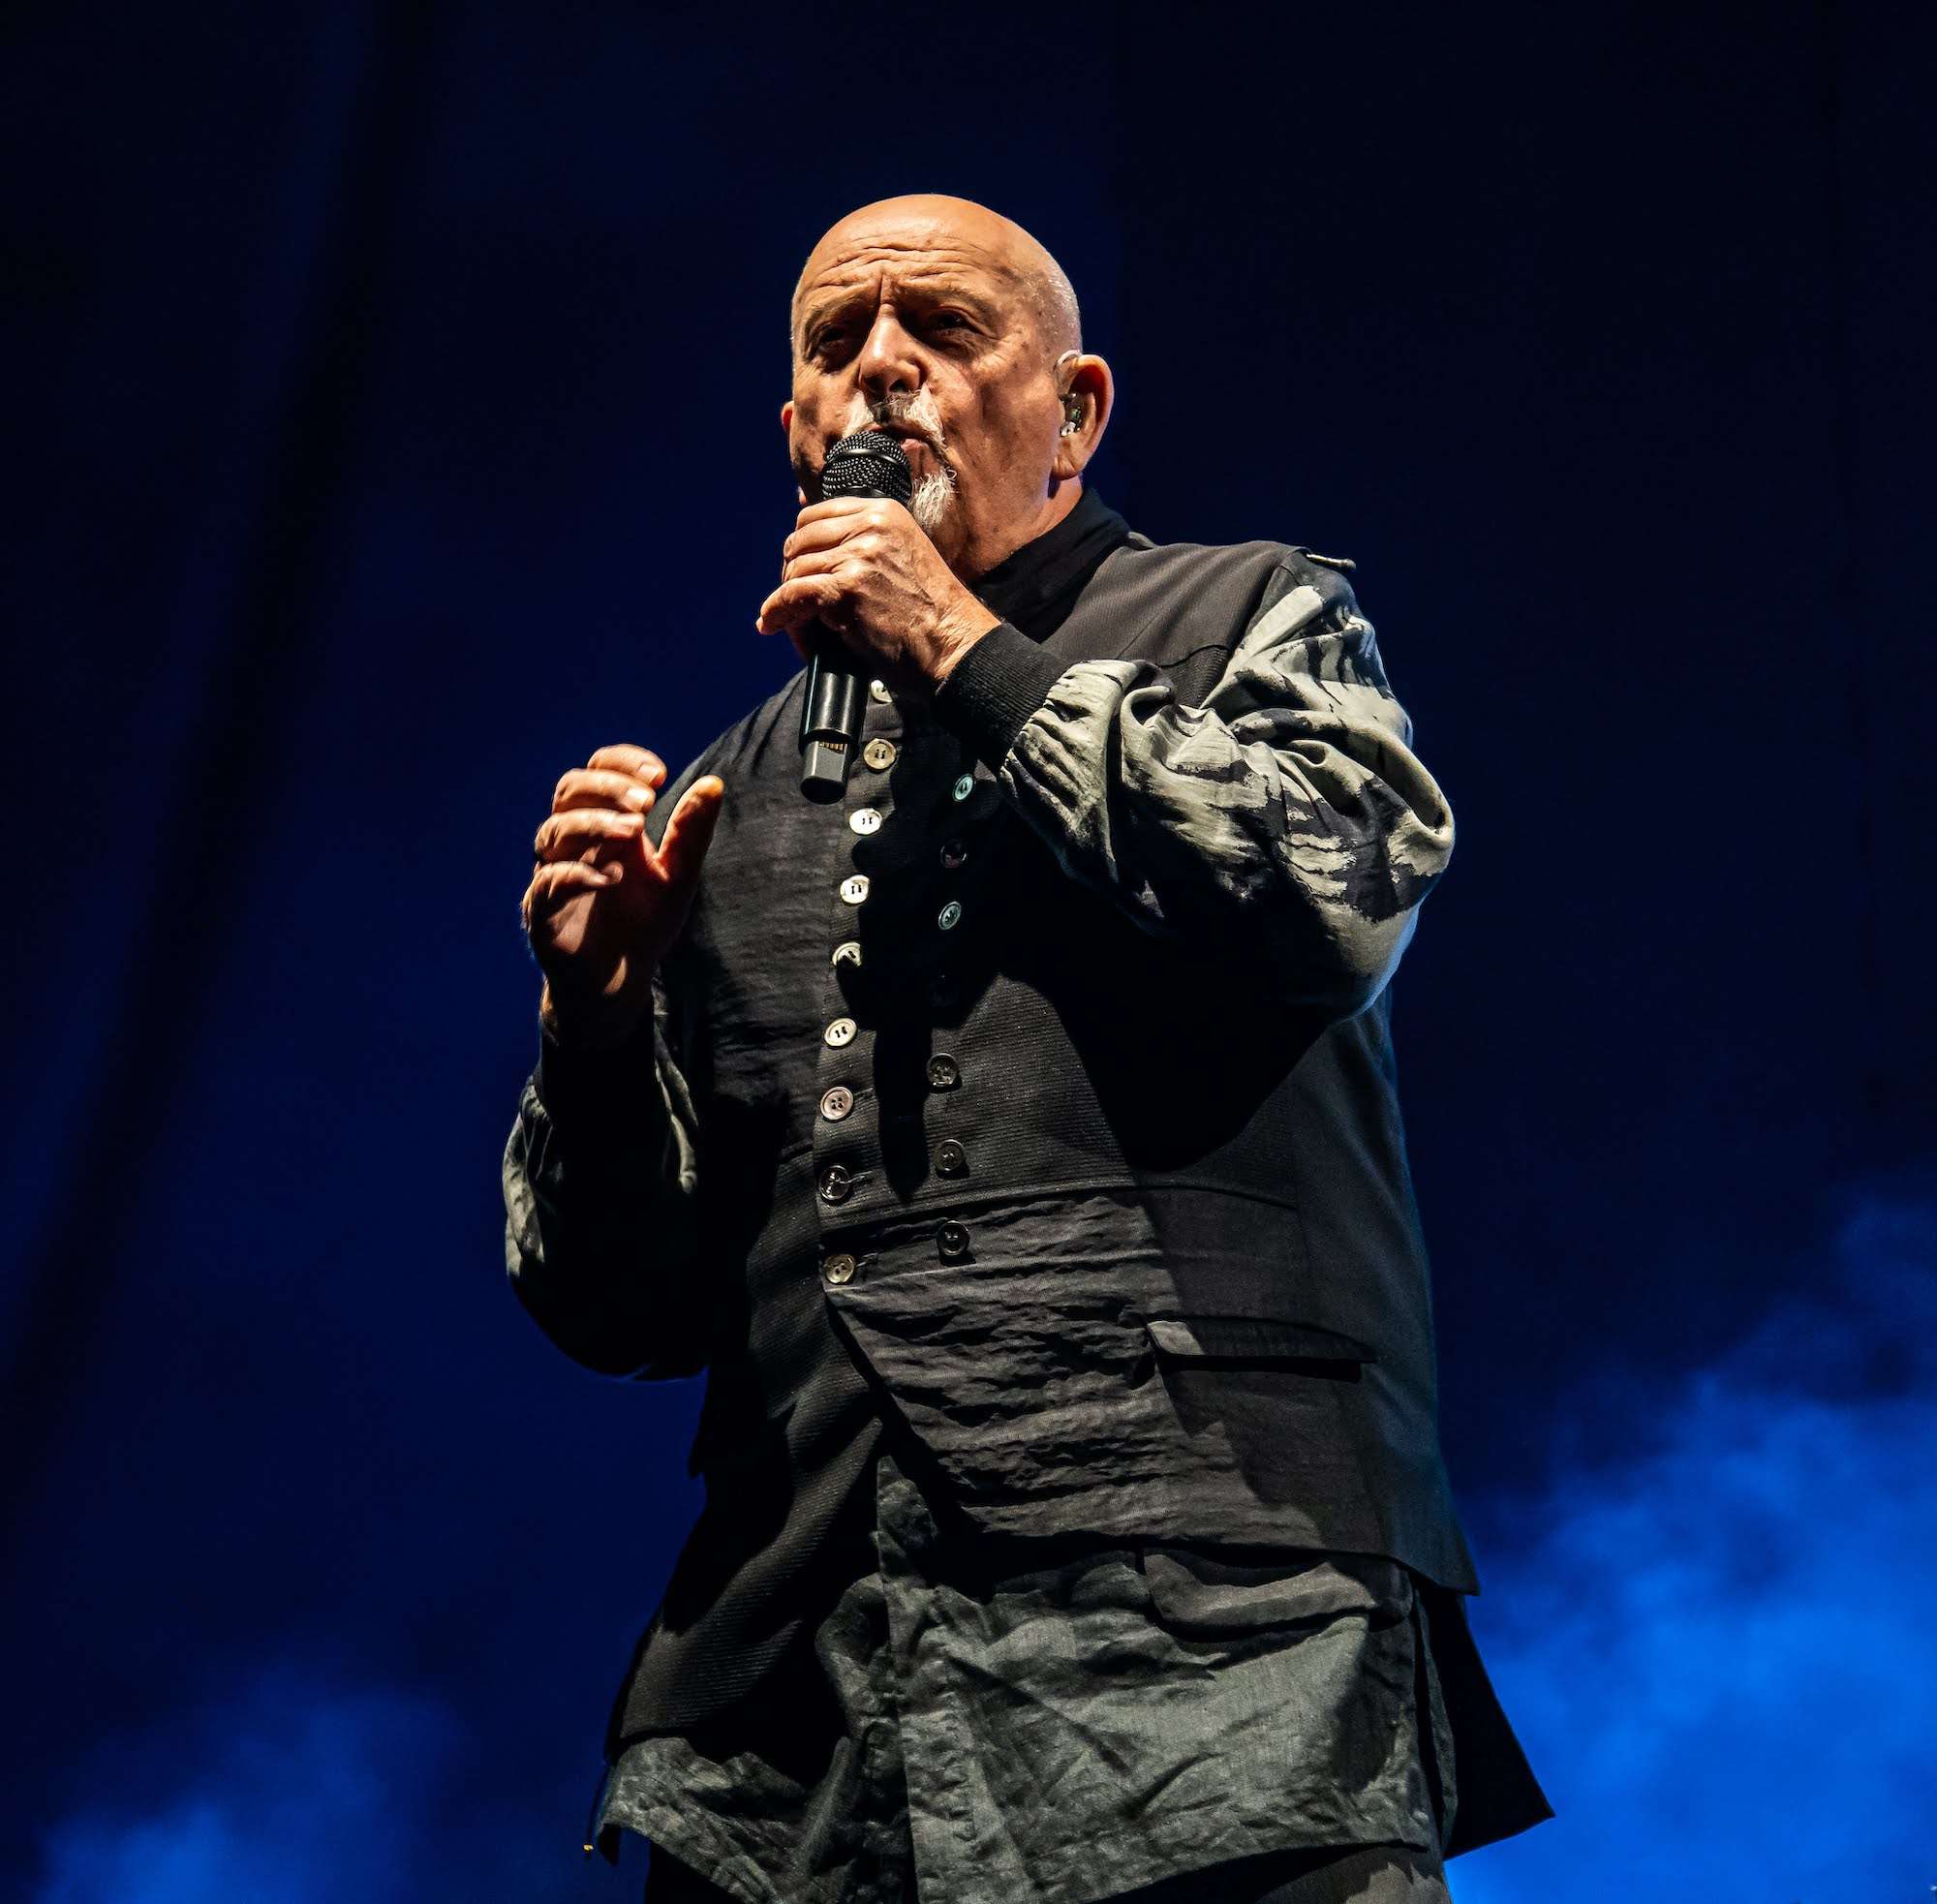 Peter Gabriel Live At United Center [GALLERY] 4